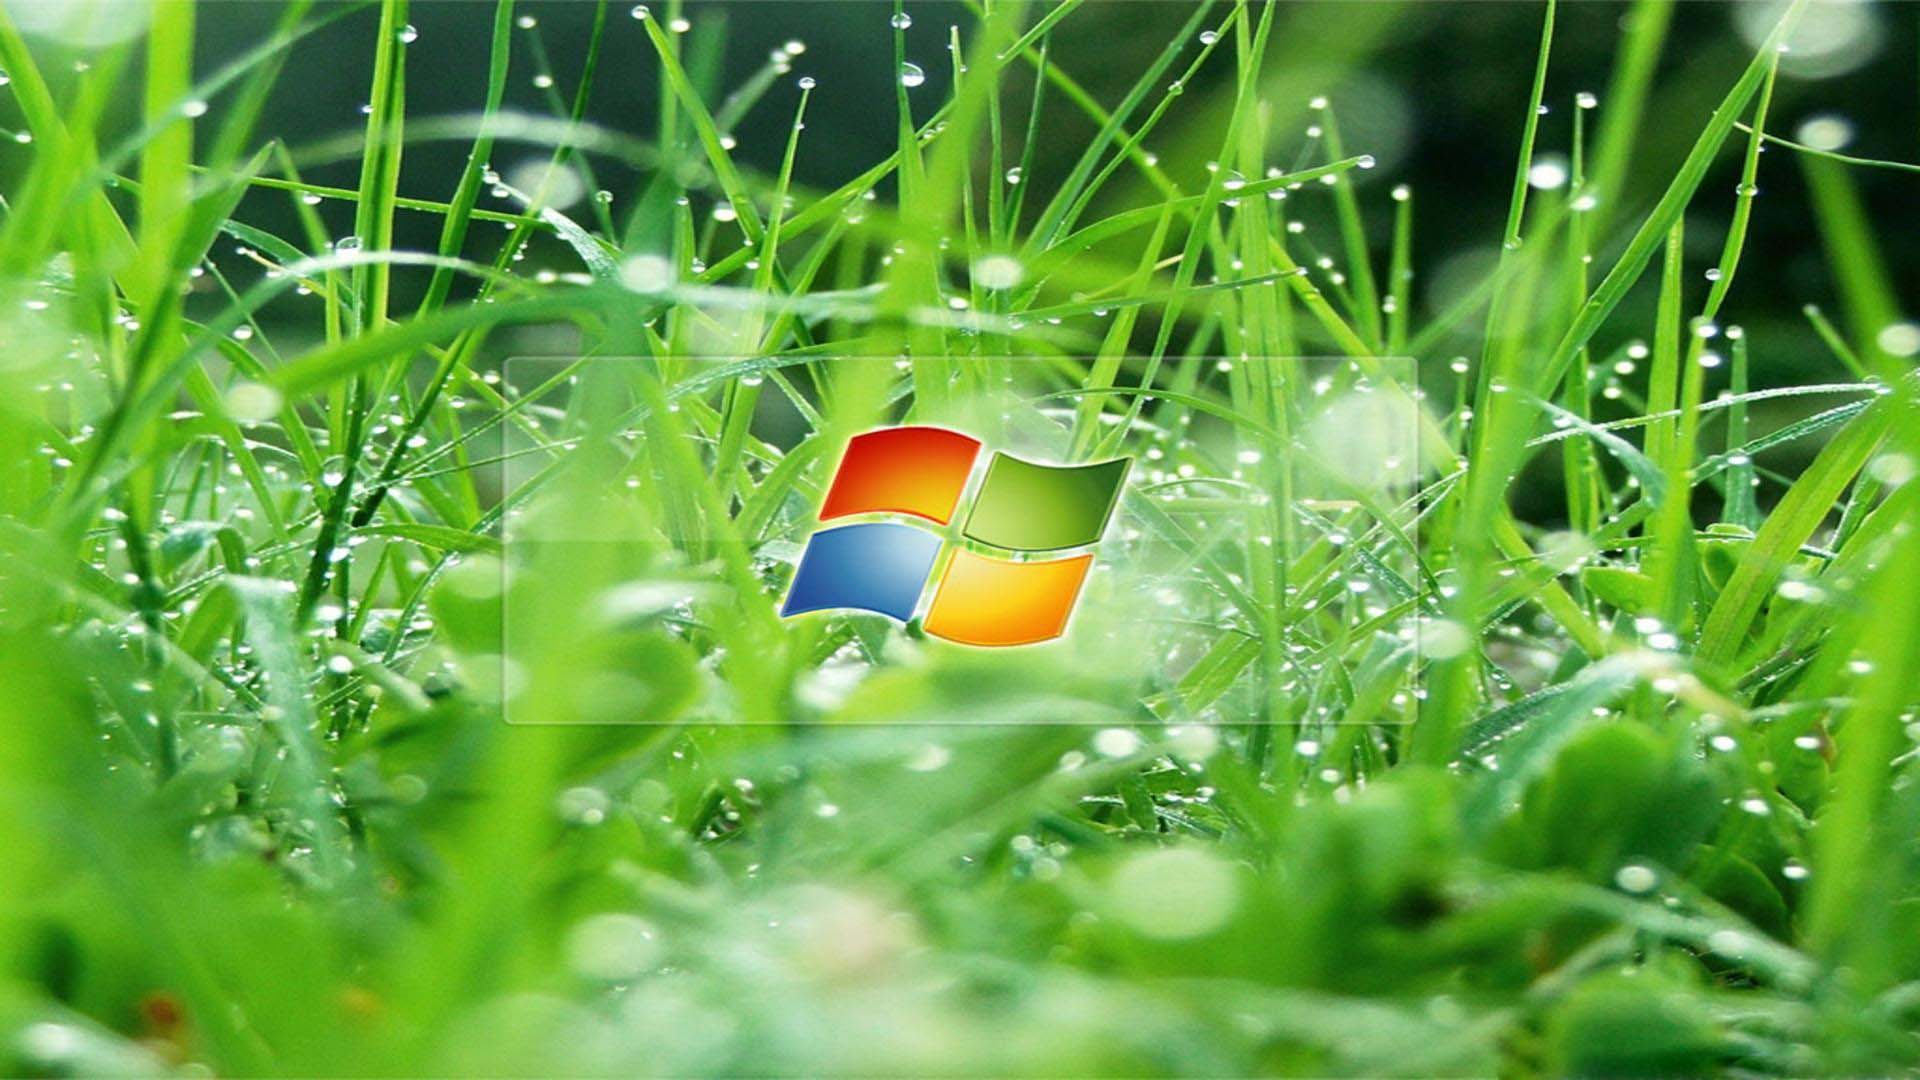 beautiful hd wallpapers for windows 8